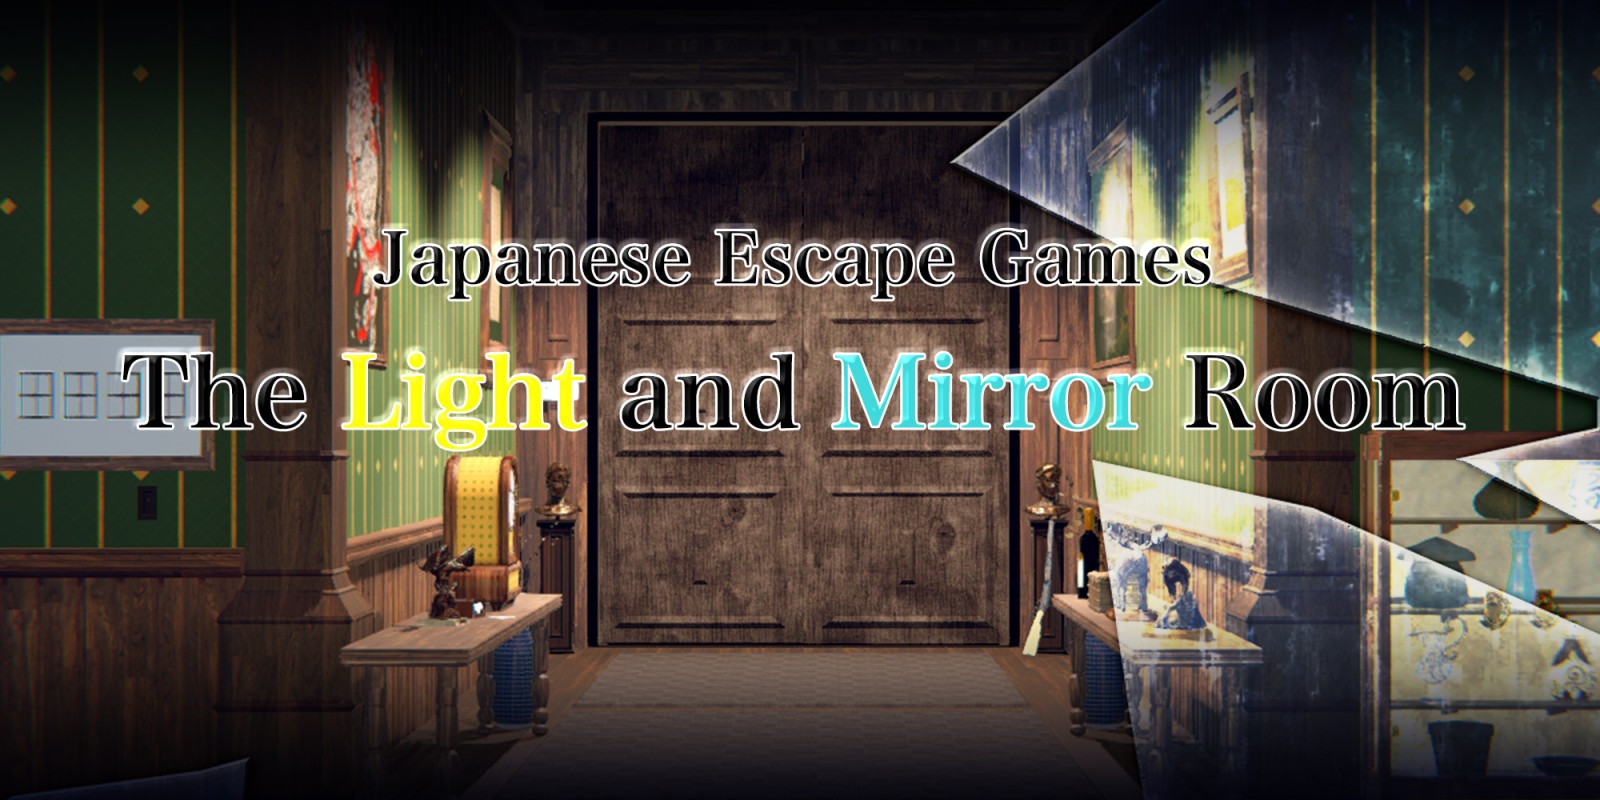 Japanese Escape Games The Light and Mirror Room